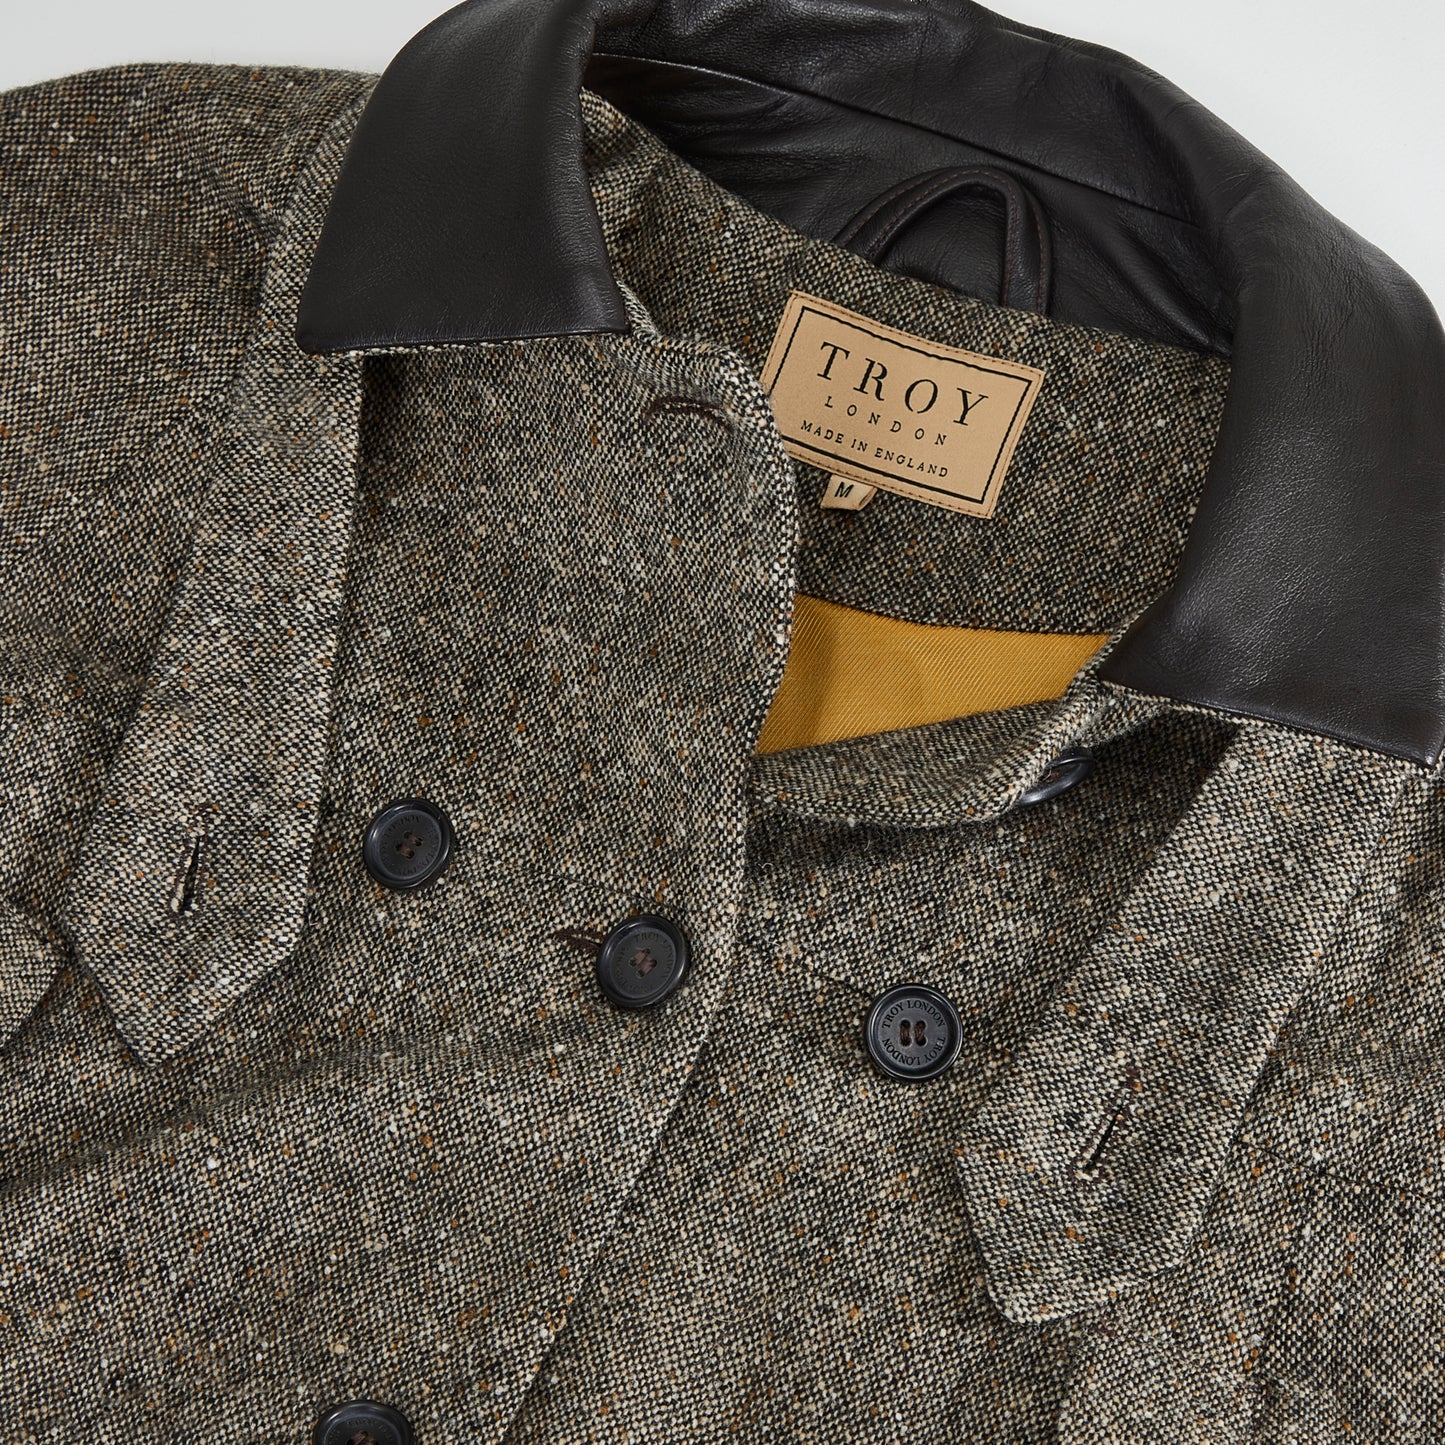 Donegal Tweed Cape